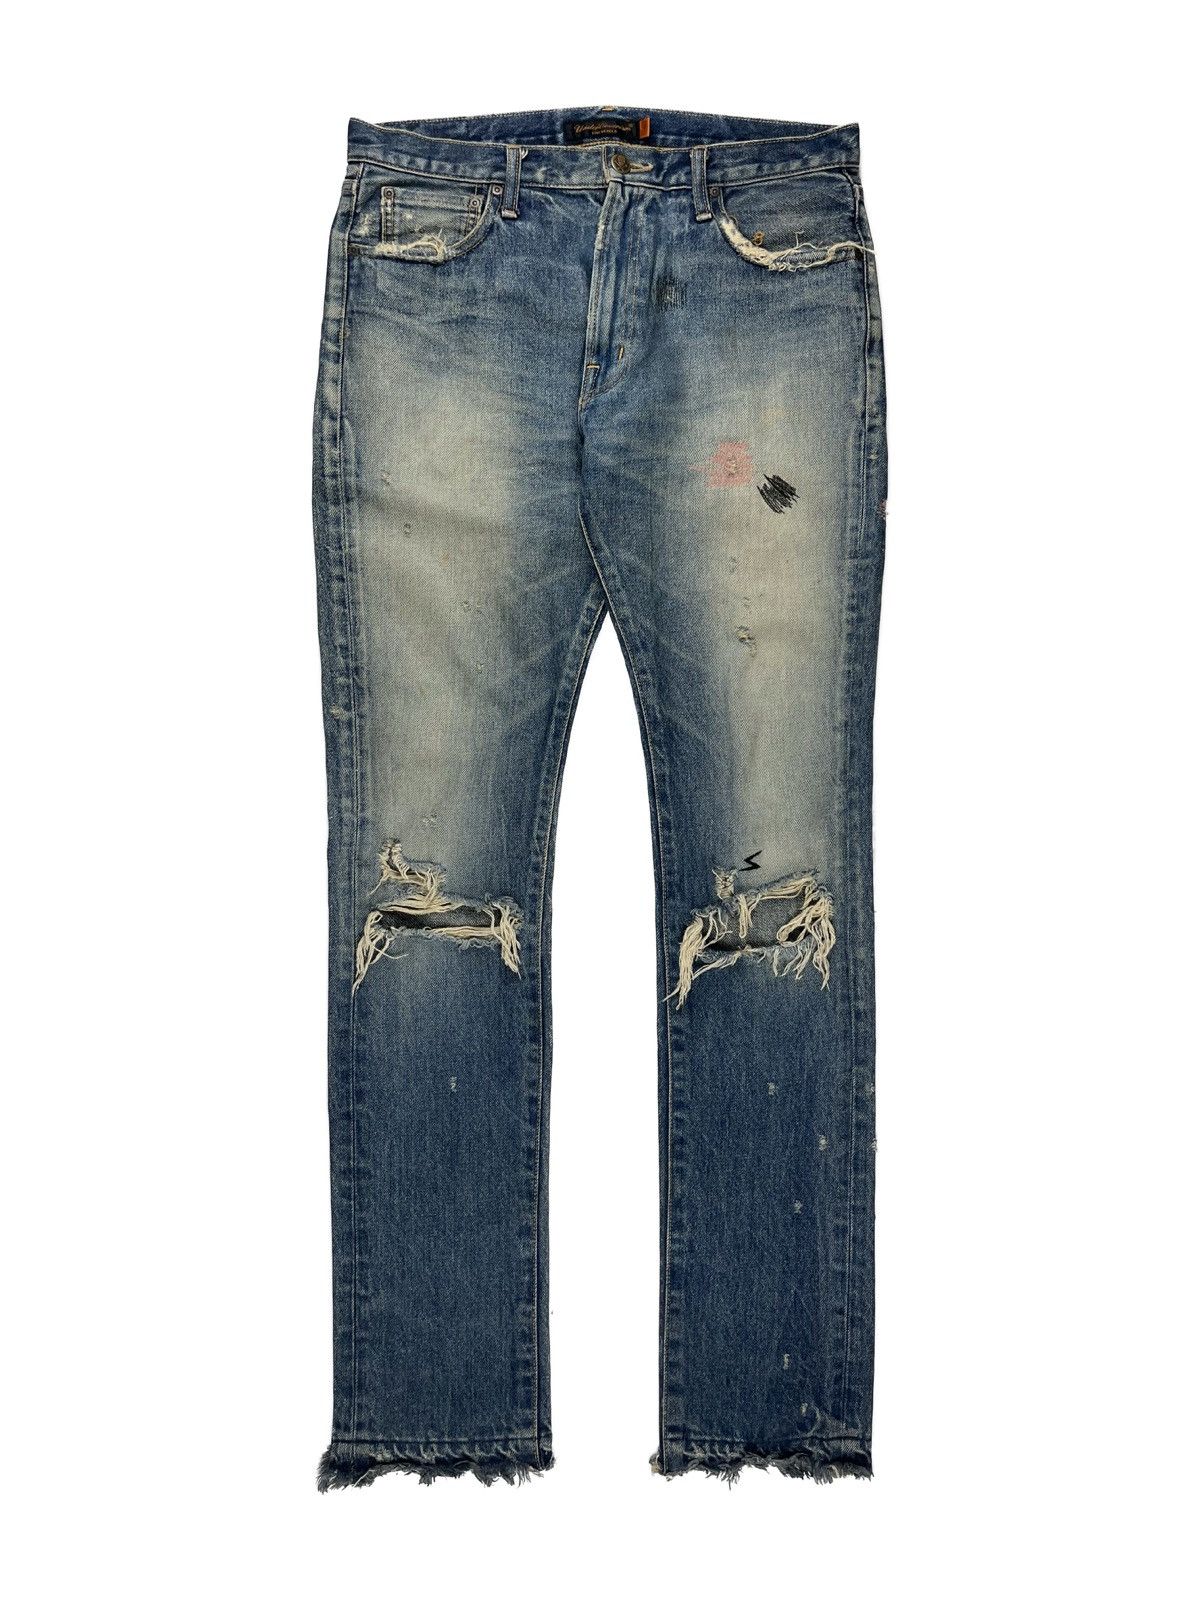 Undercover But Beautiful Jeans | Grailed